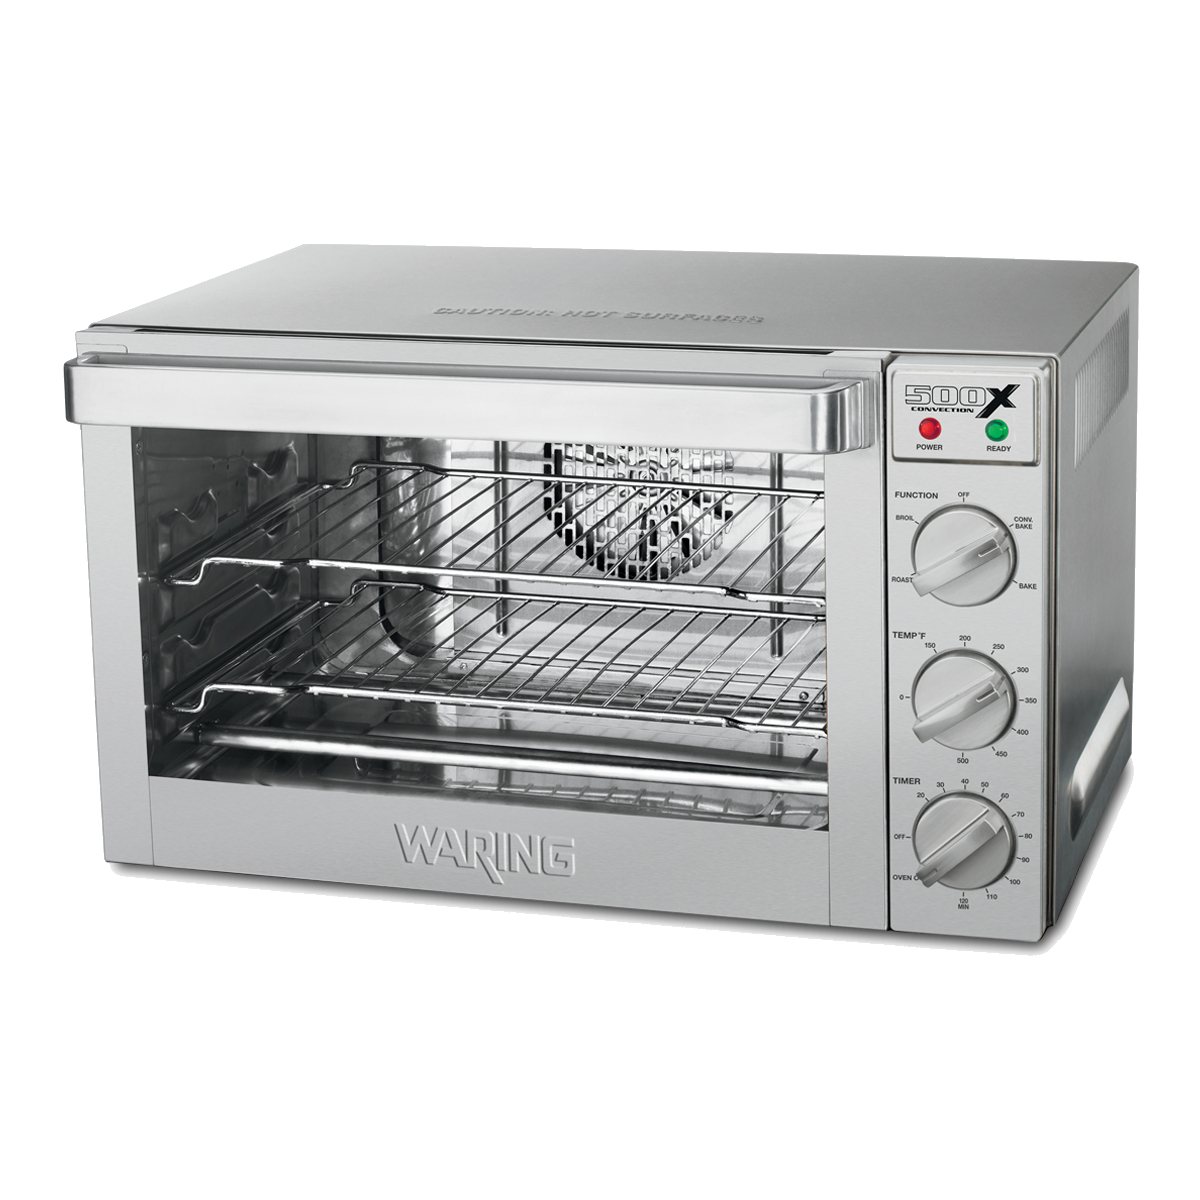 https://www.waringcommercialproducts.com/files/products/wco500x-waring-convection-oven-main.png